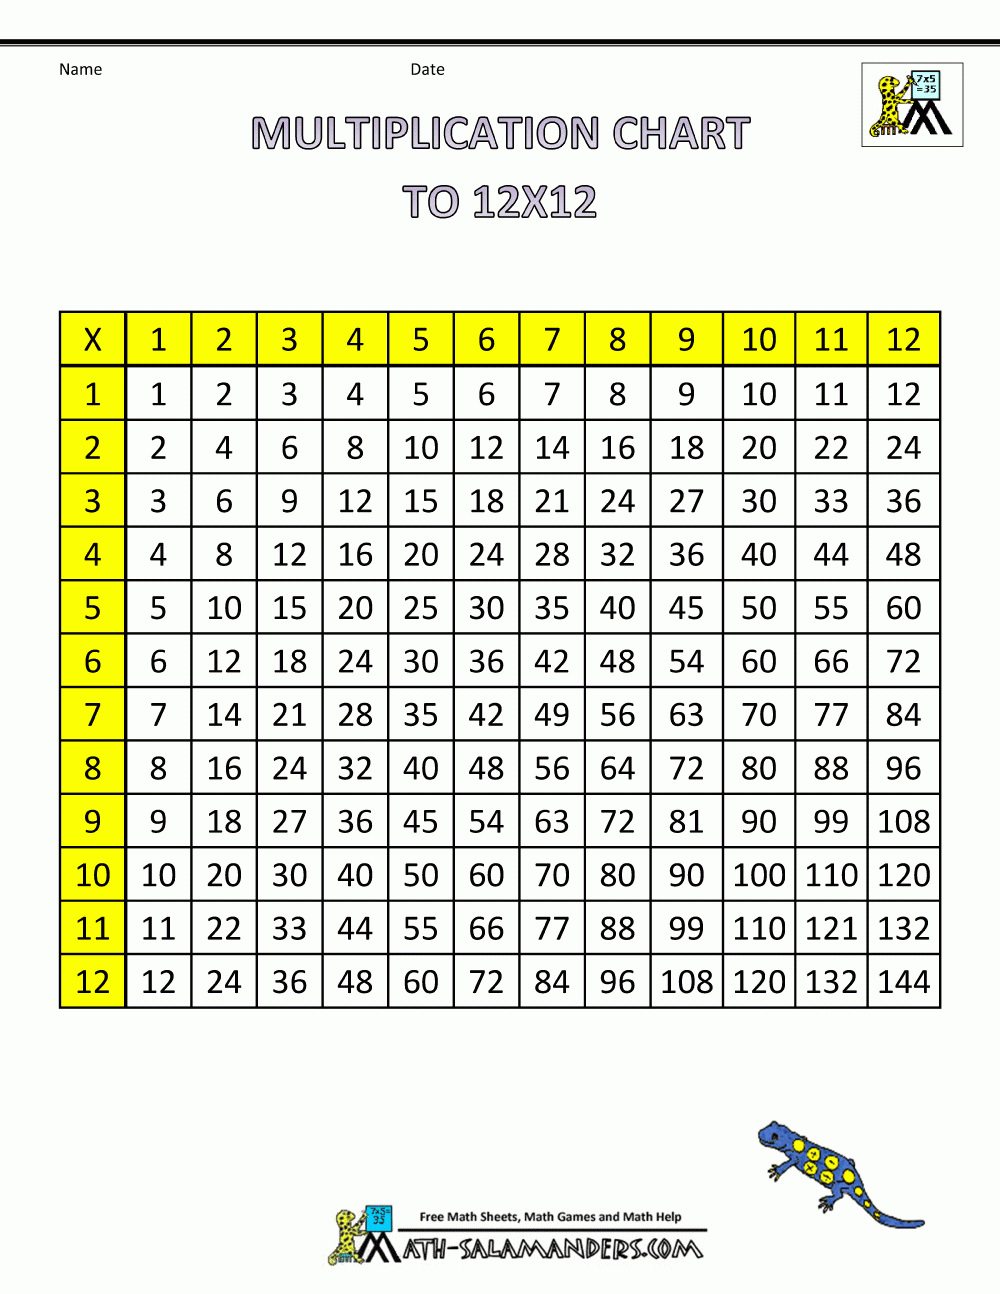 Printable Blank Multiplication Table 0-12 intended for Printable Blank Multiplication Chart 0-12